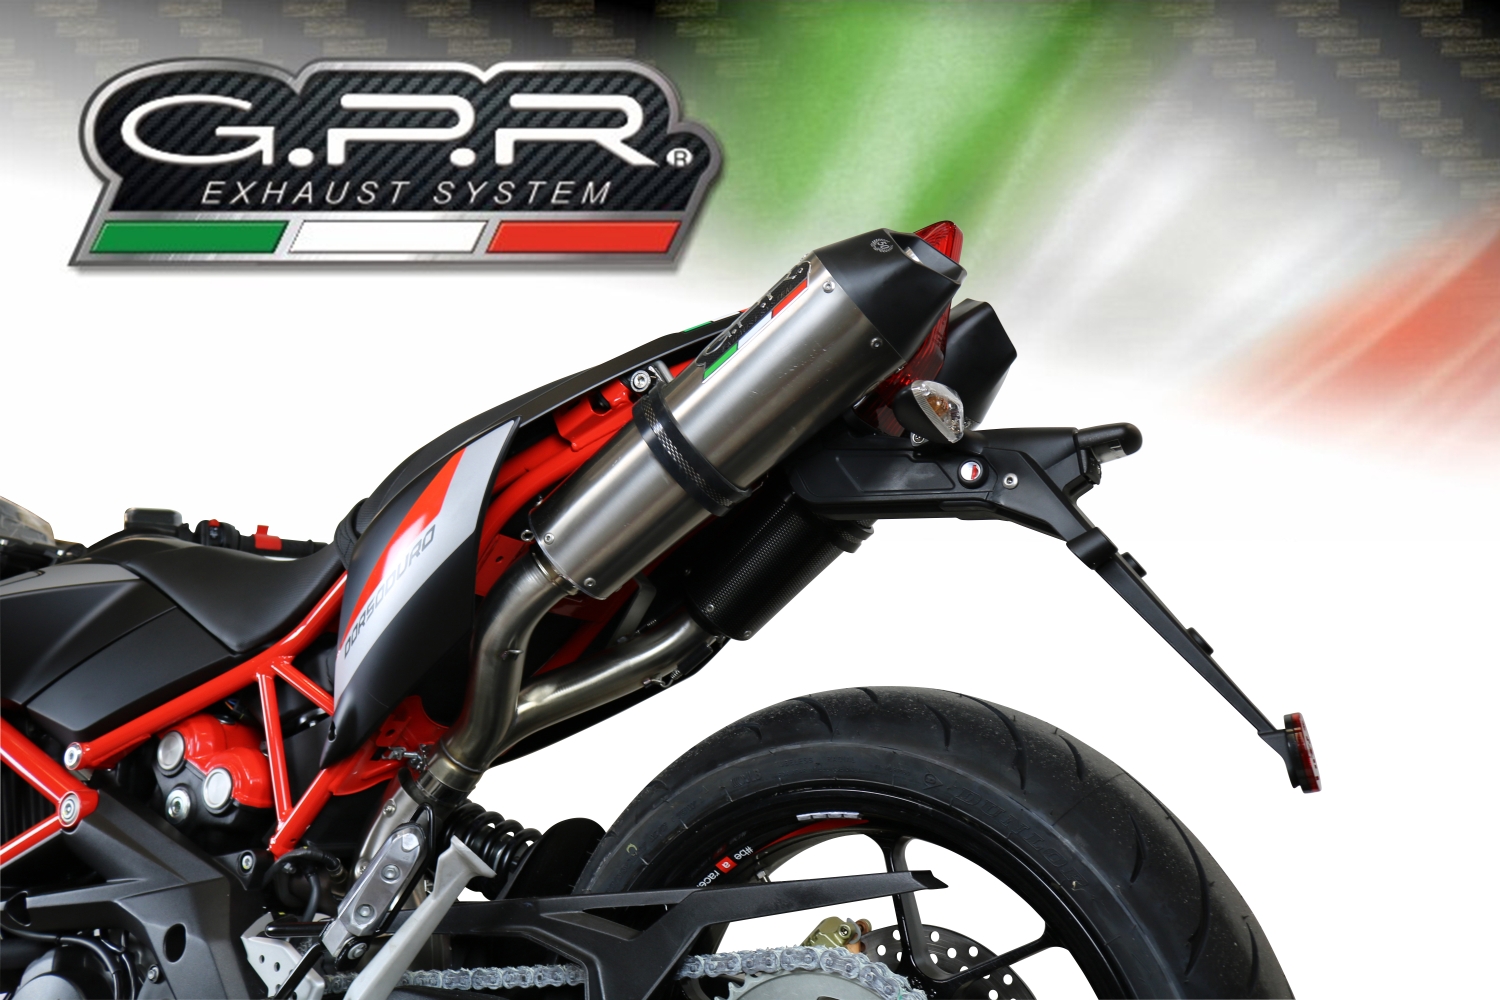 Exhaust system compatible with Aprilia Shiver 900 2017-2020, Gpe Ann. titanium, Dual racing slip-on exhaust including link pipes 